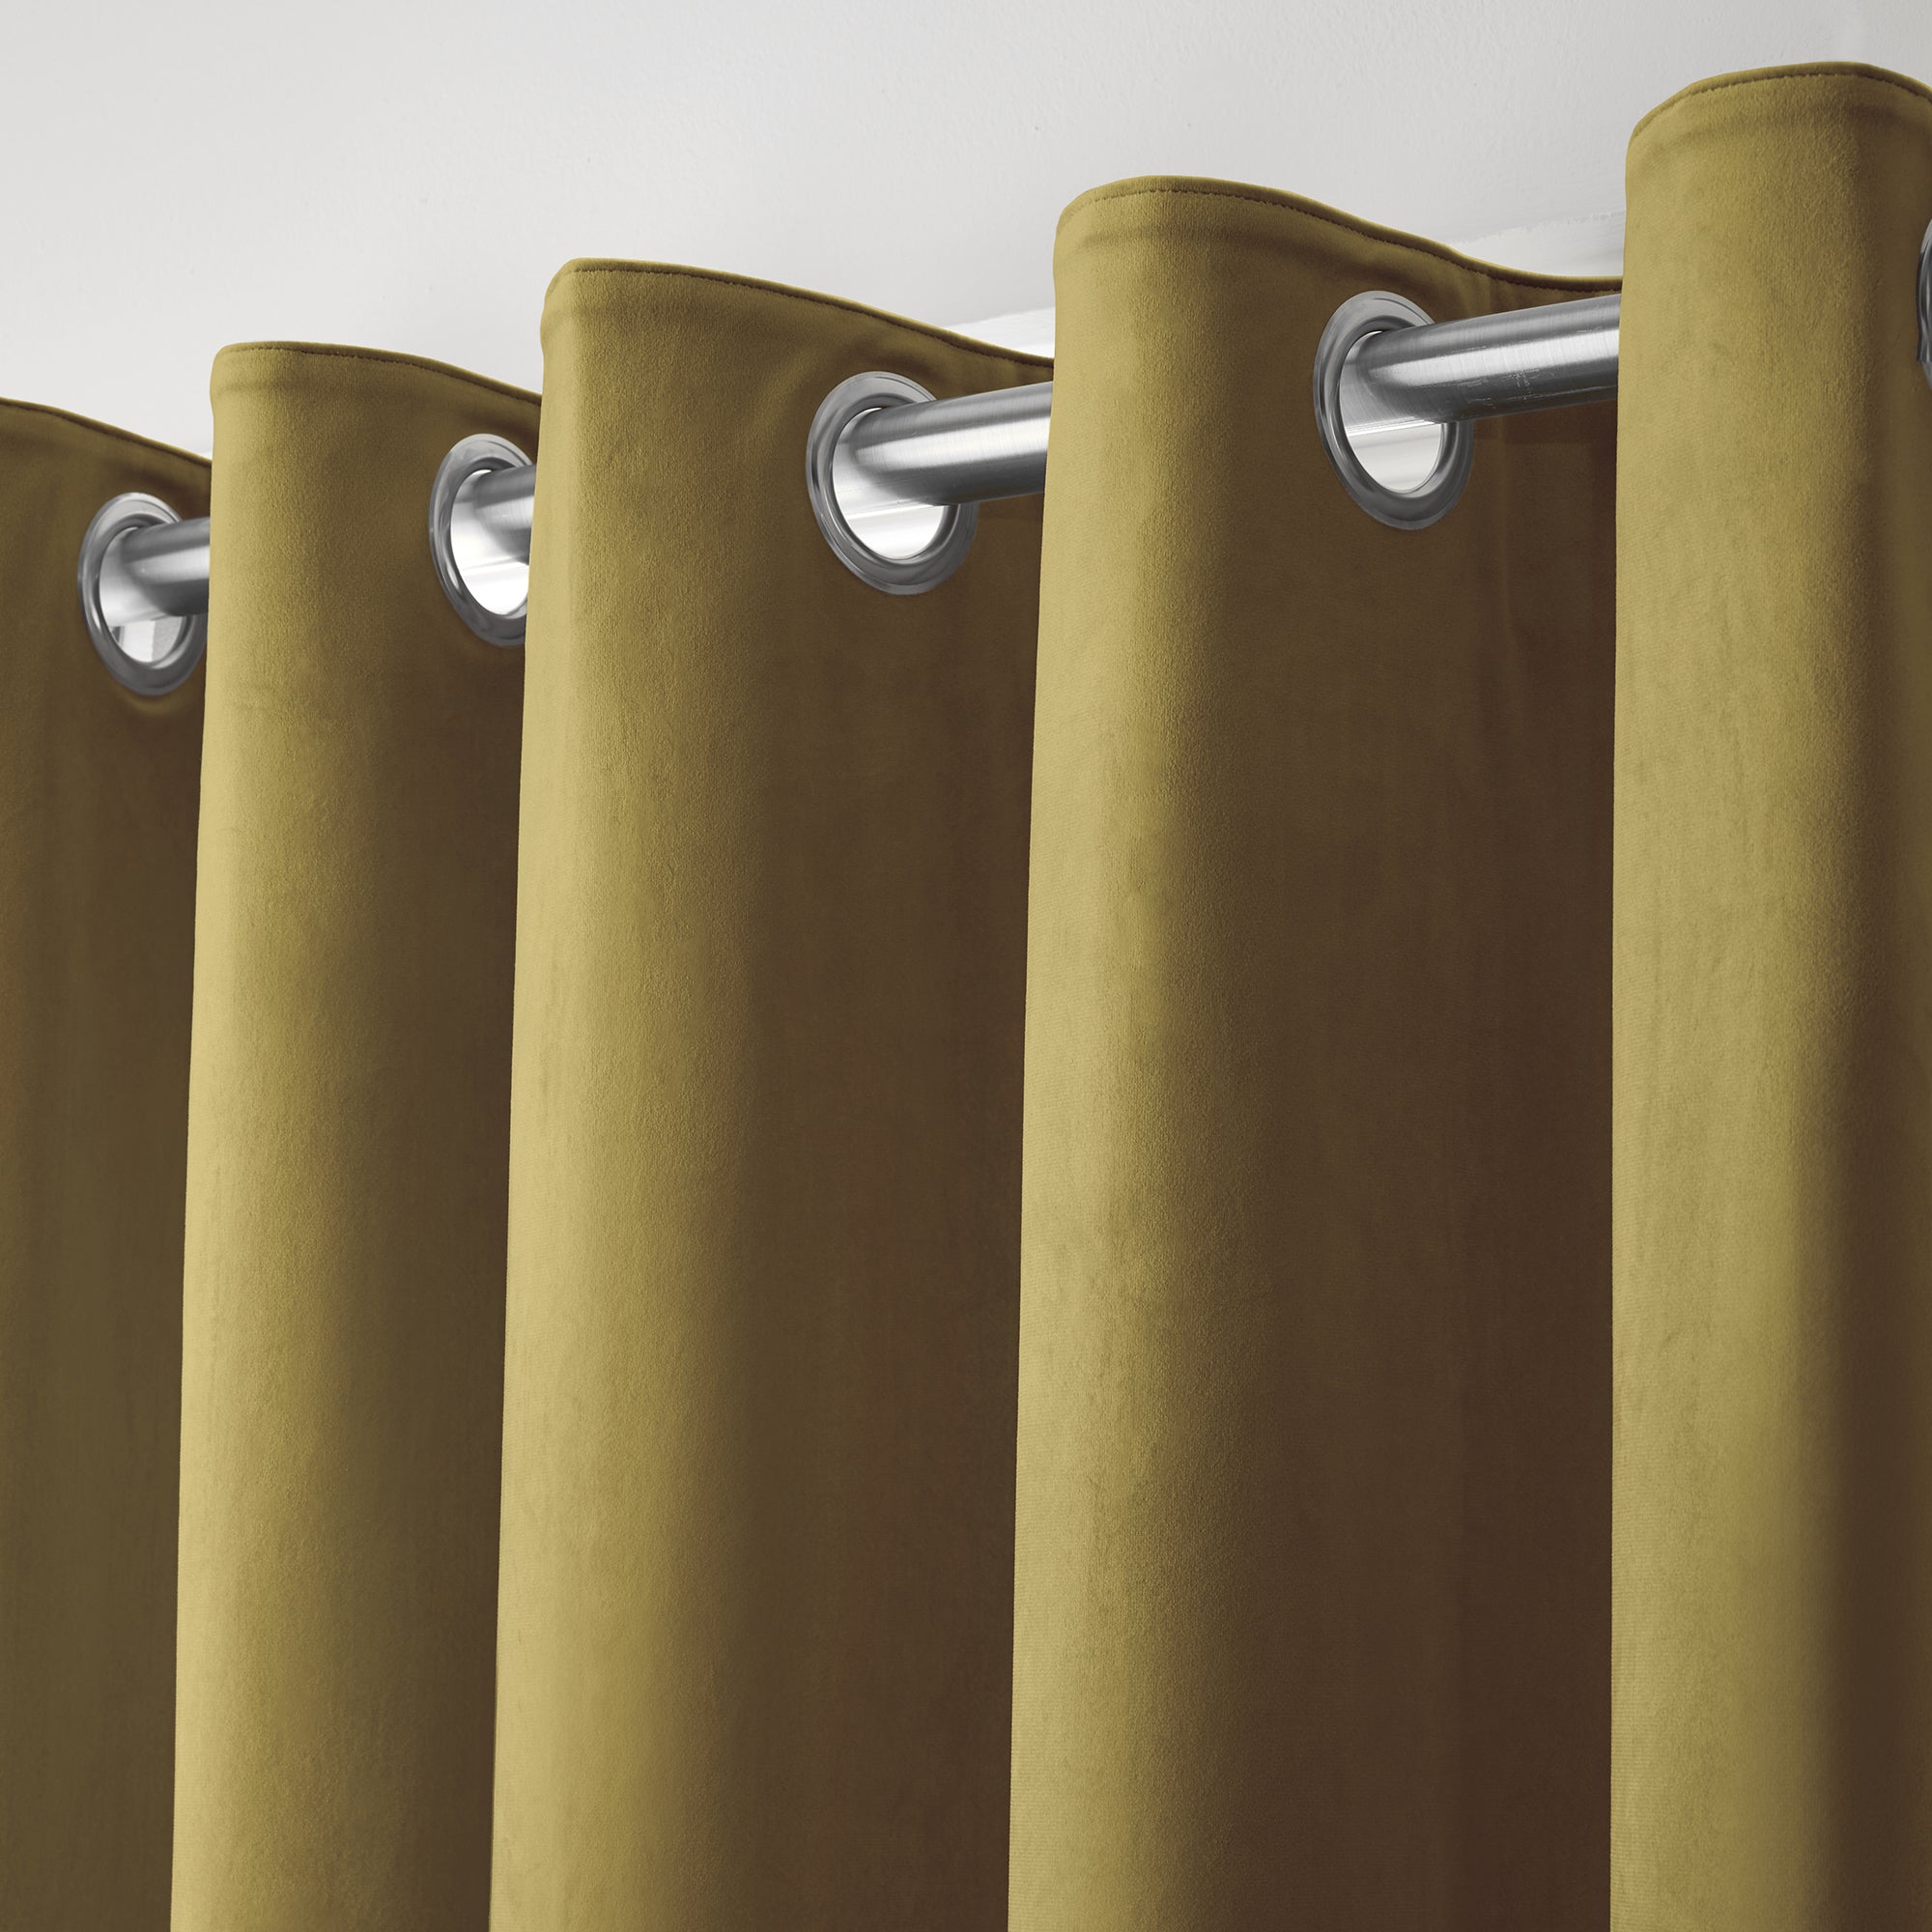 Montrose - Velvet Blackout Pair of Eyelet Curtains in Ochre - by Laurence Llewelyn-Bowen